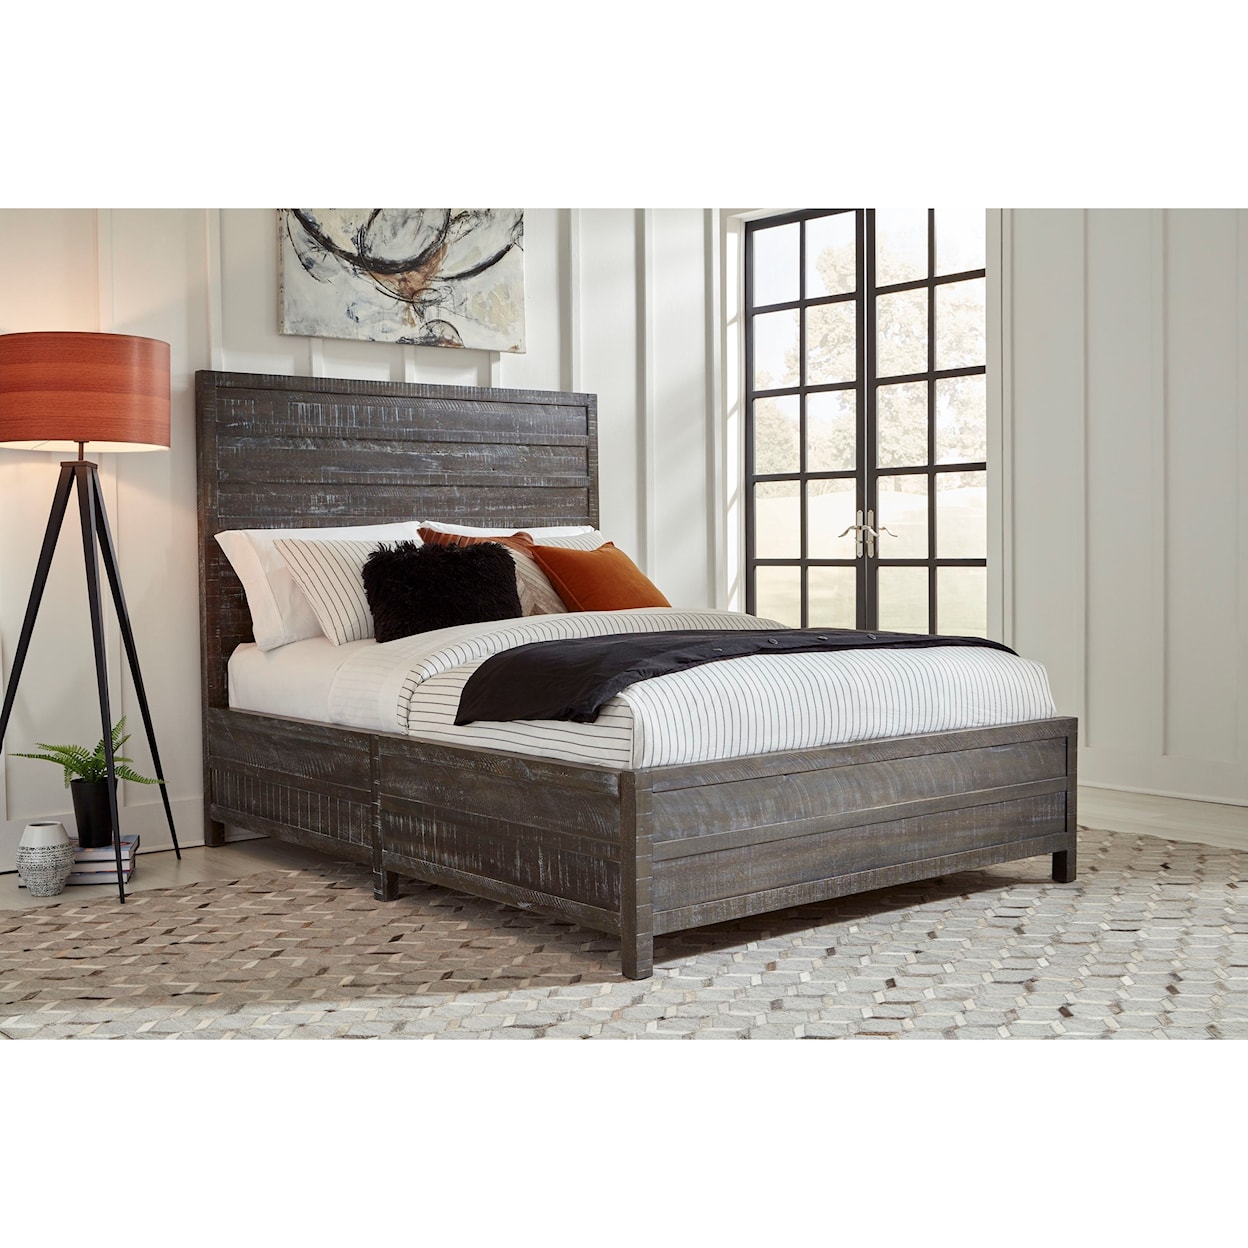 Modus International Townsend King Low-Profile Bed